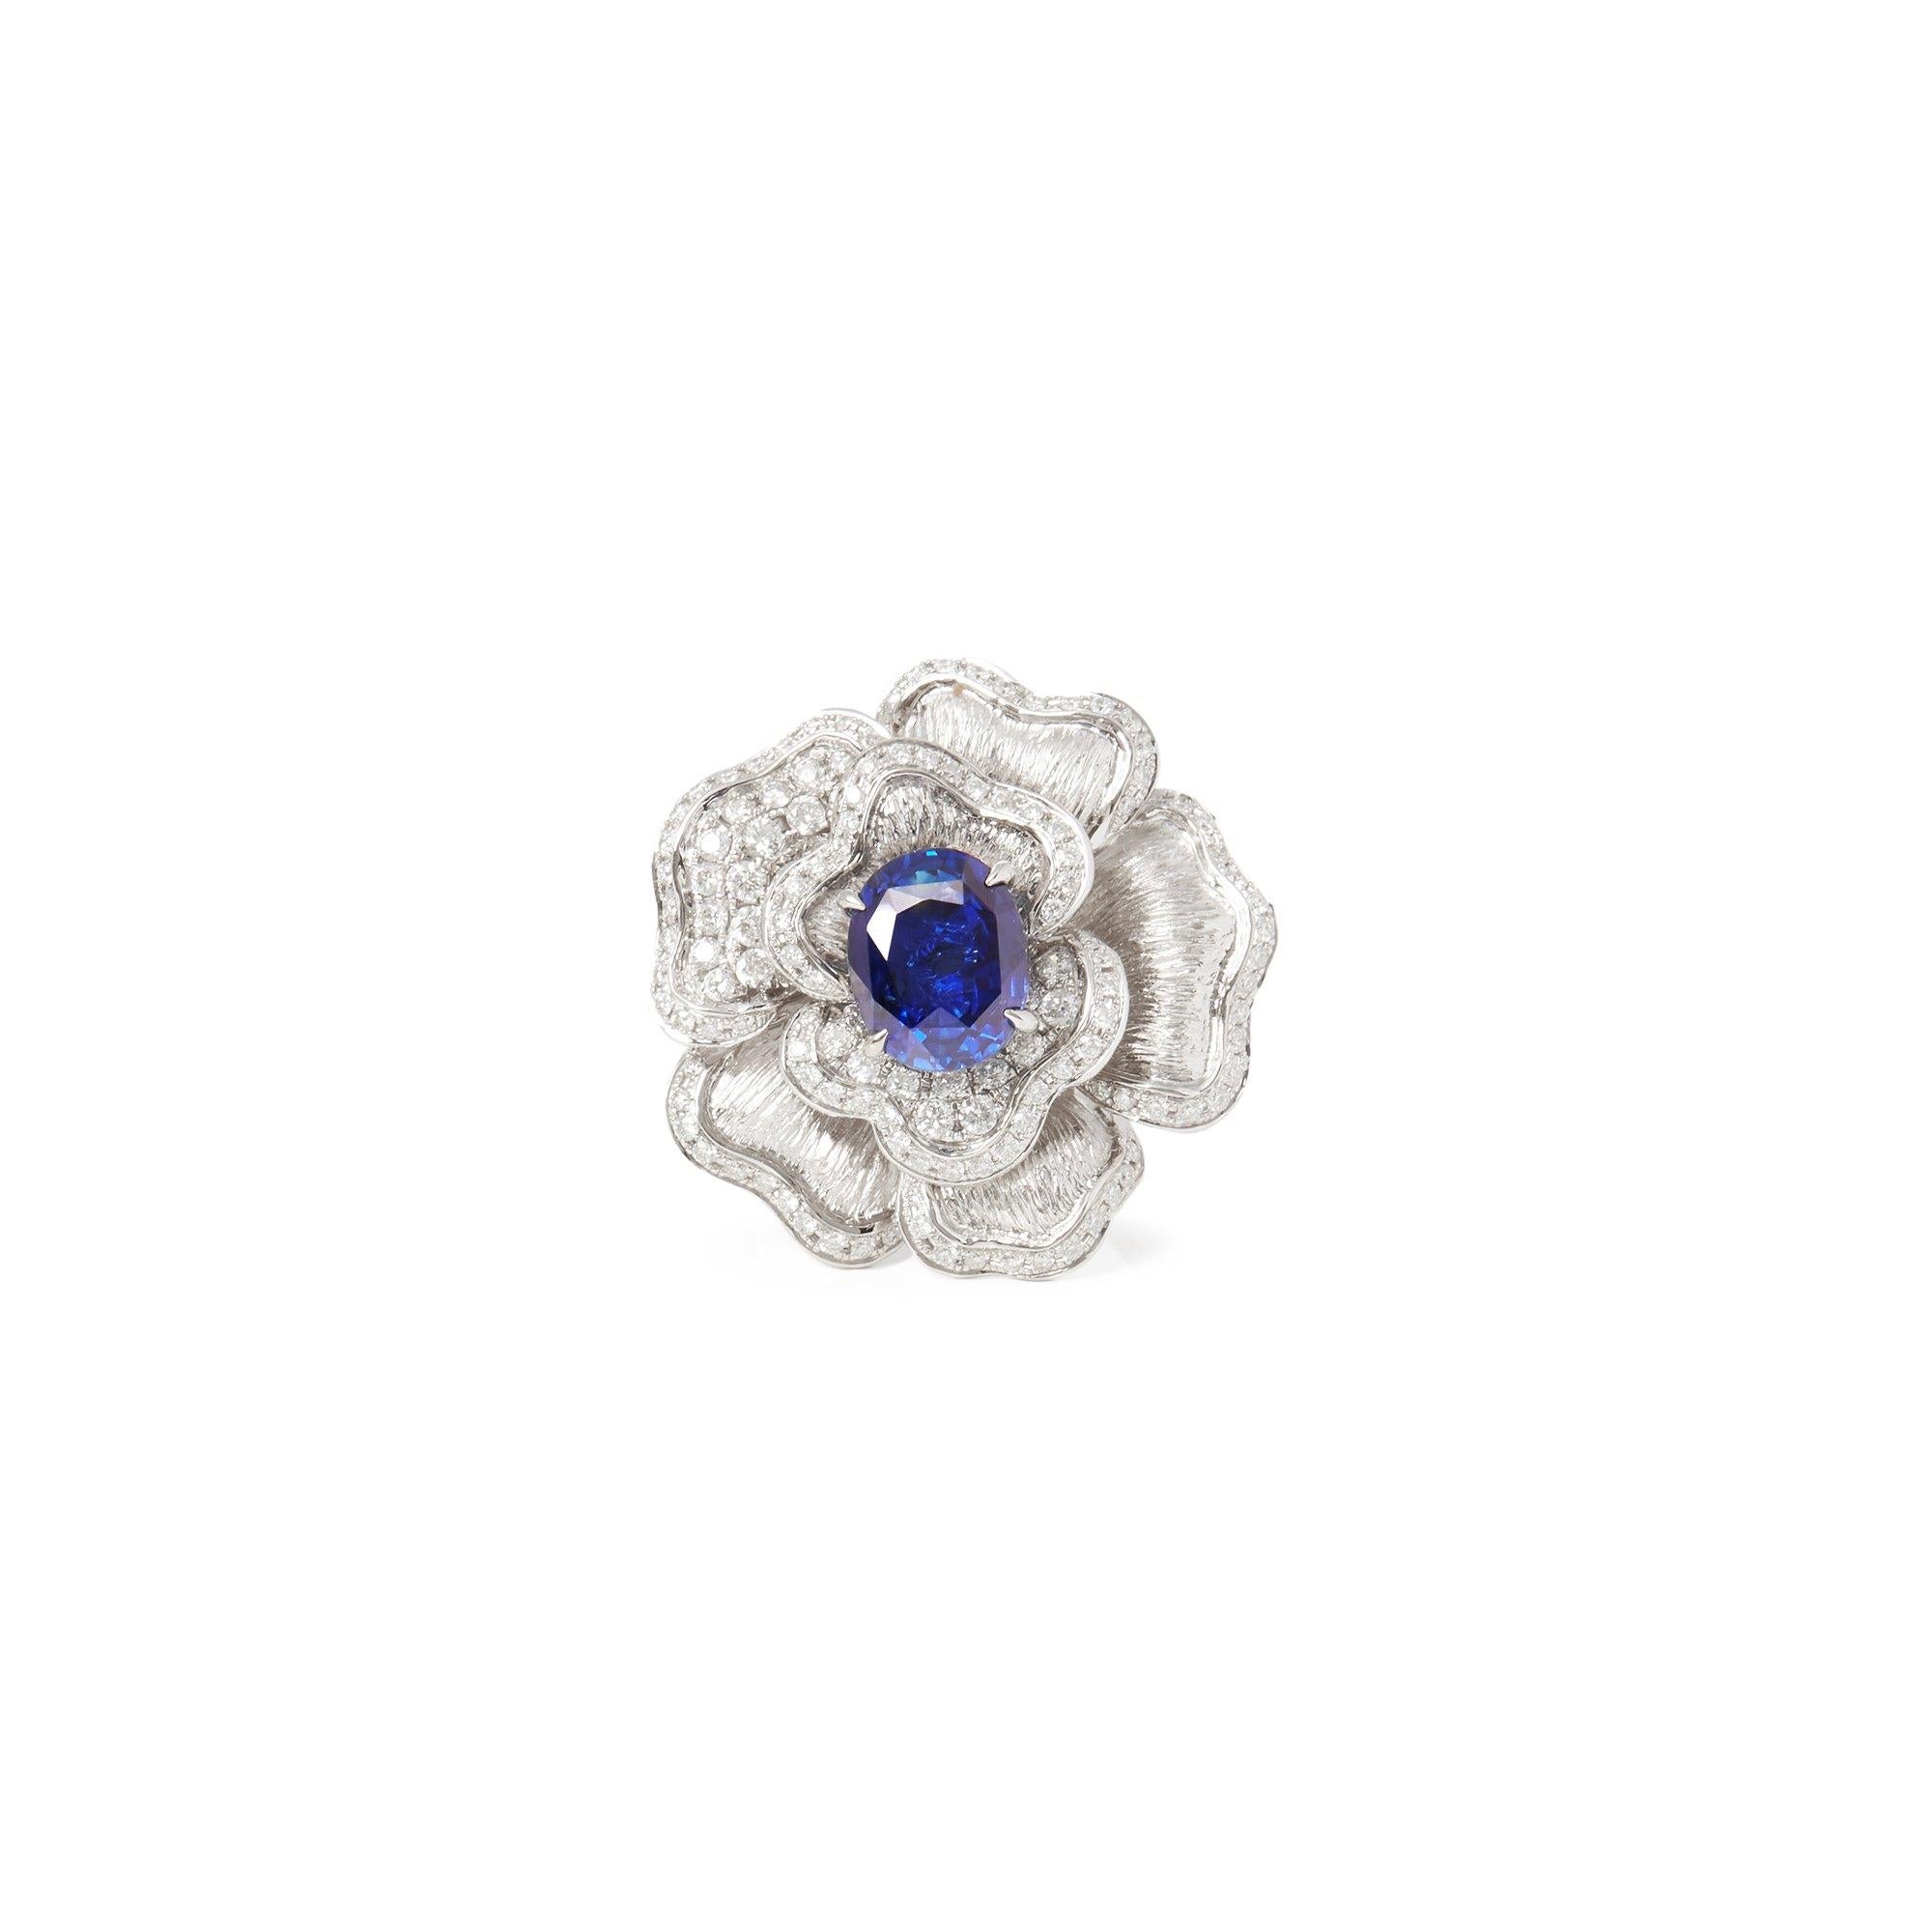 This ring designed by David Jerome is from his private collection and features one oval cut Sapphire totalling 3.00cts sourced in Sri Lanka. Set with round brilliant but Diamonds totalling 0.98cts mounted in an 18k white gold setting. Finger size UK